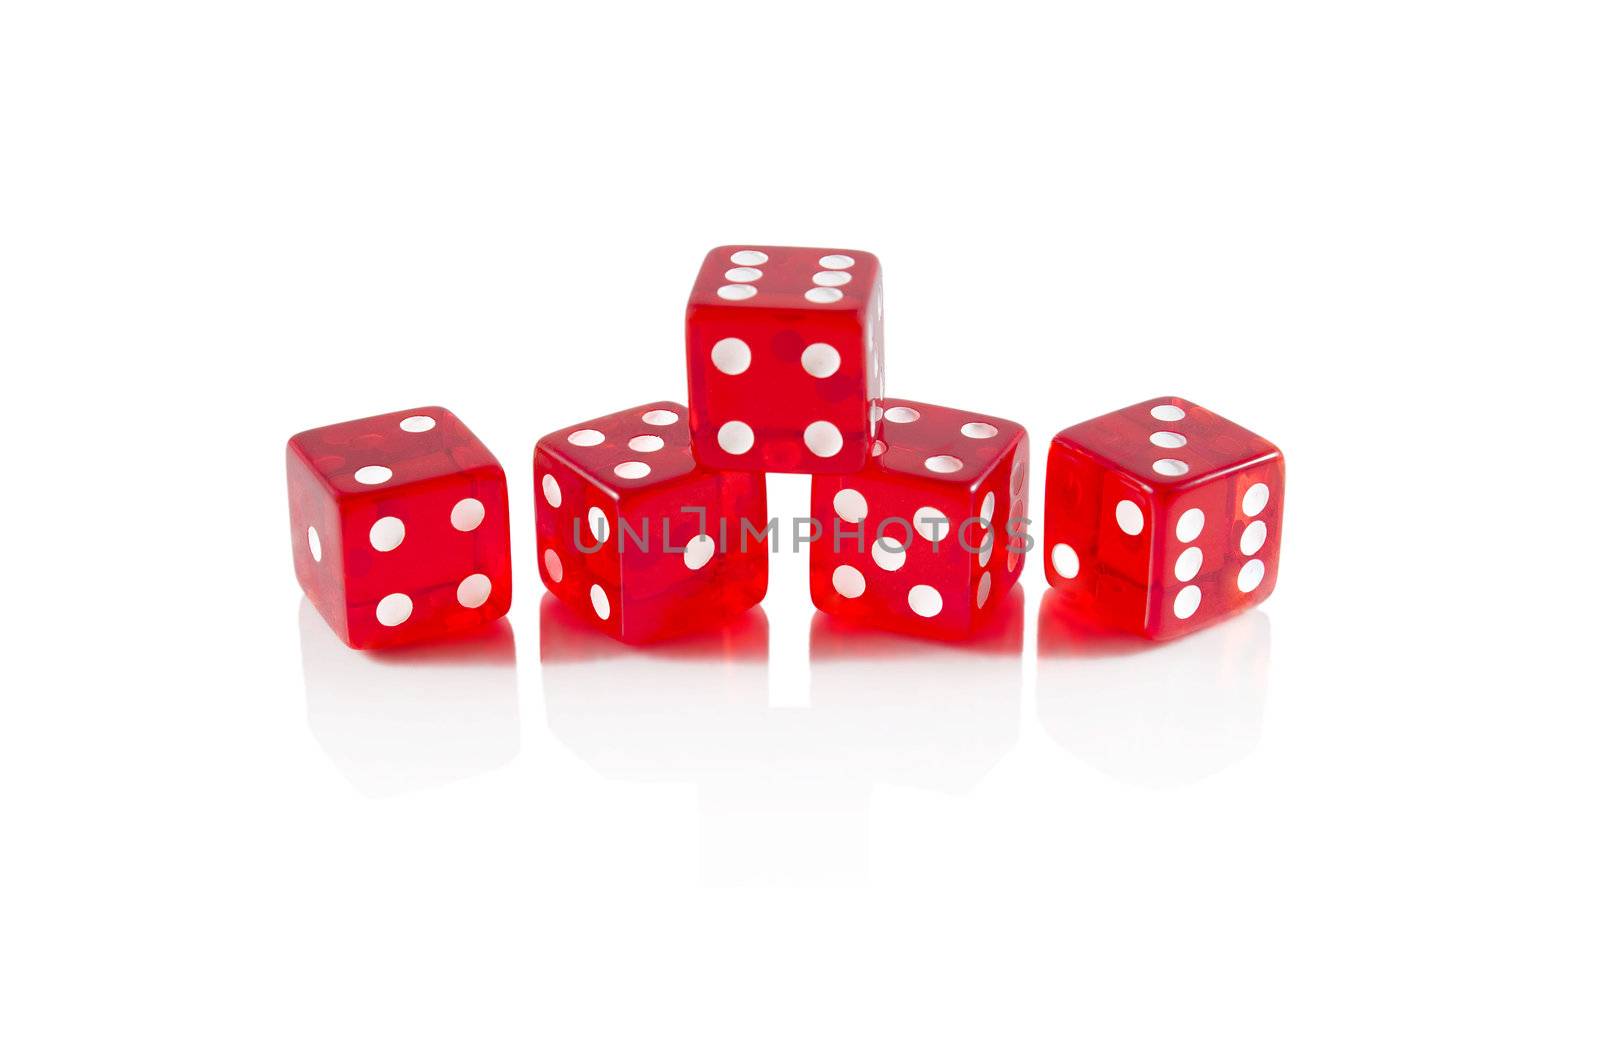 Red dice on white isolated background with beautiful reflection.